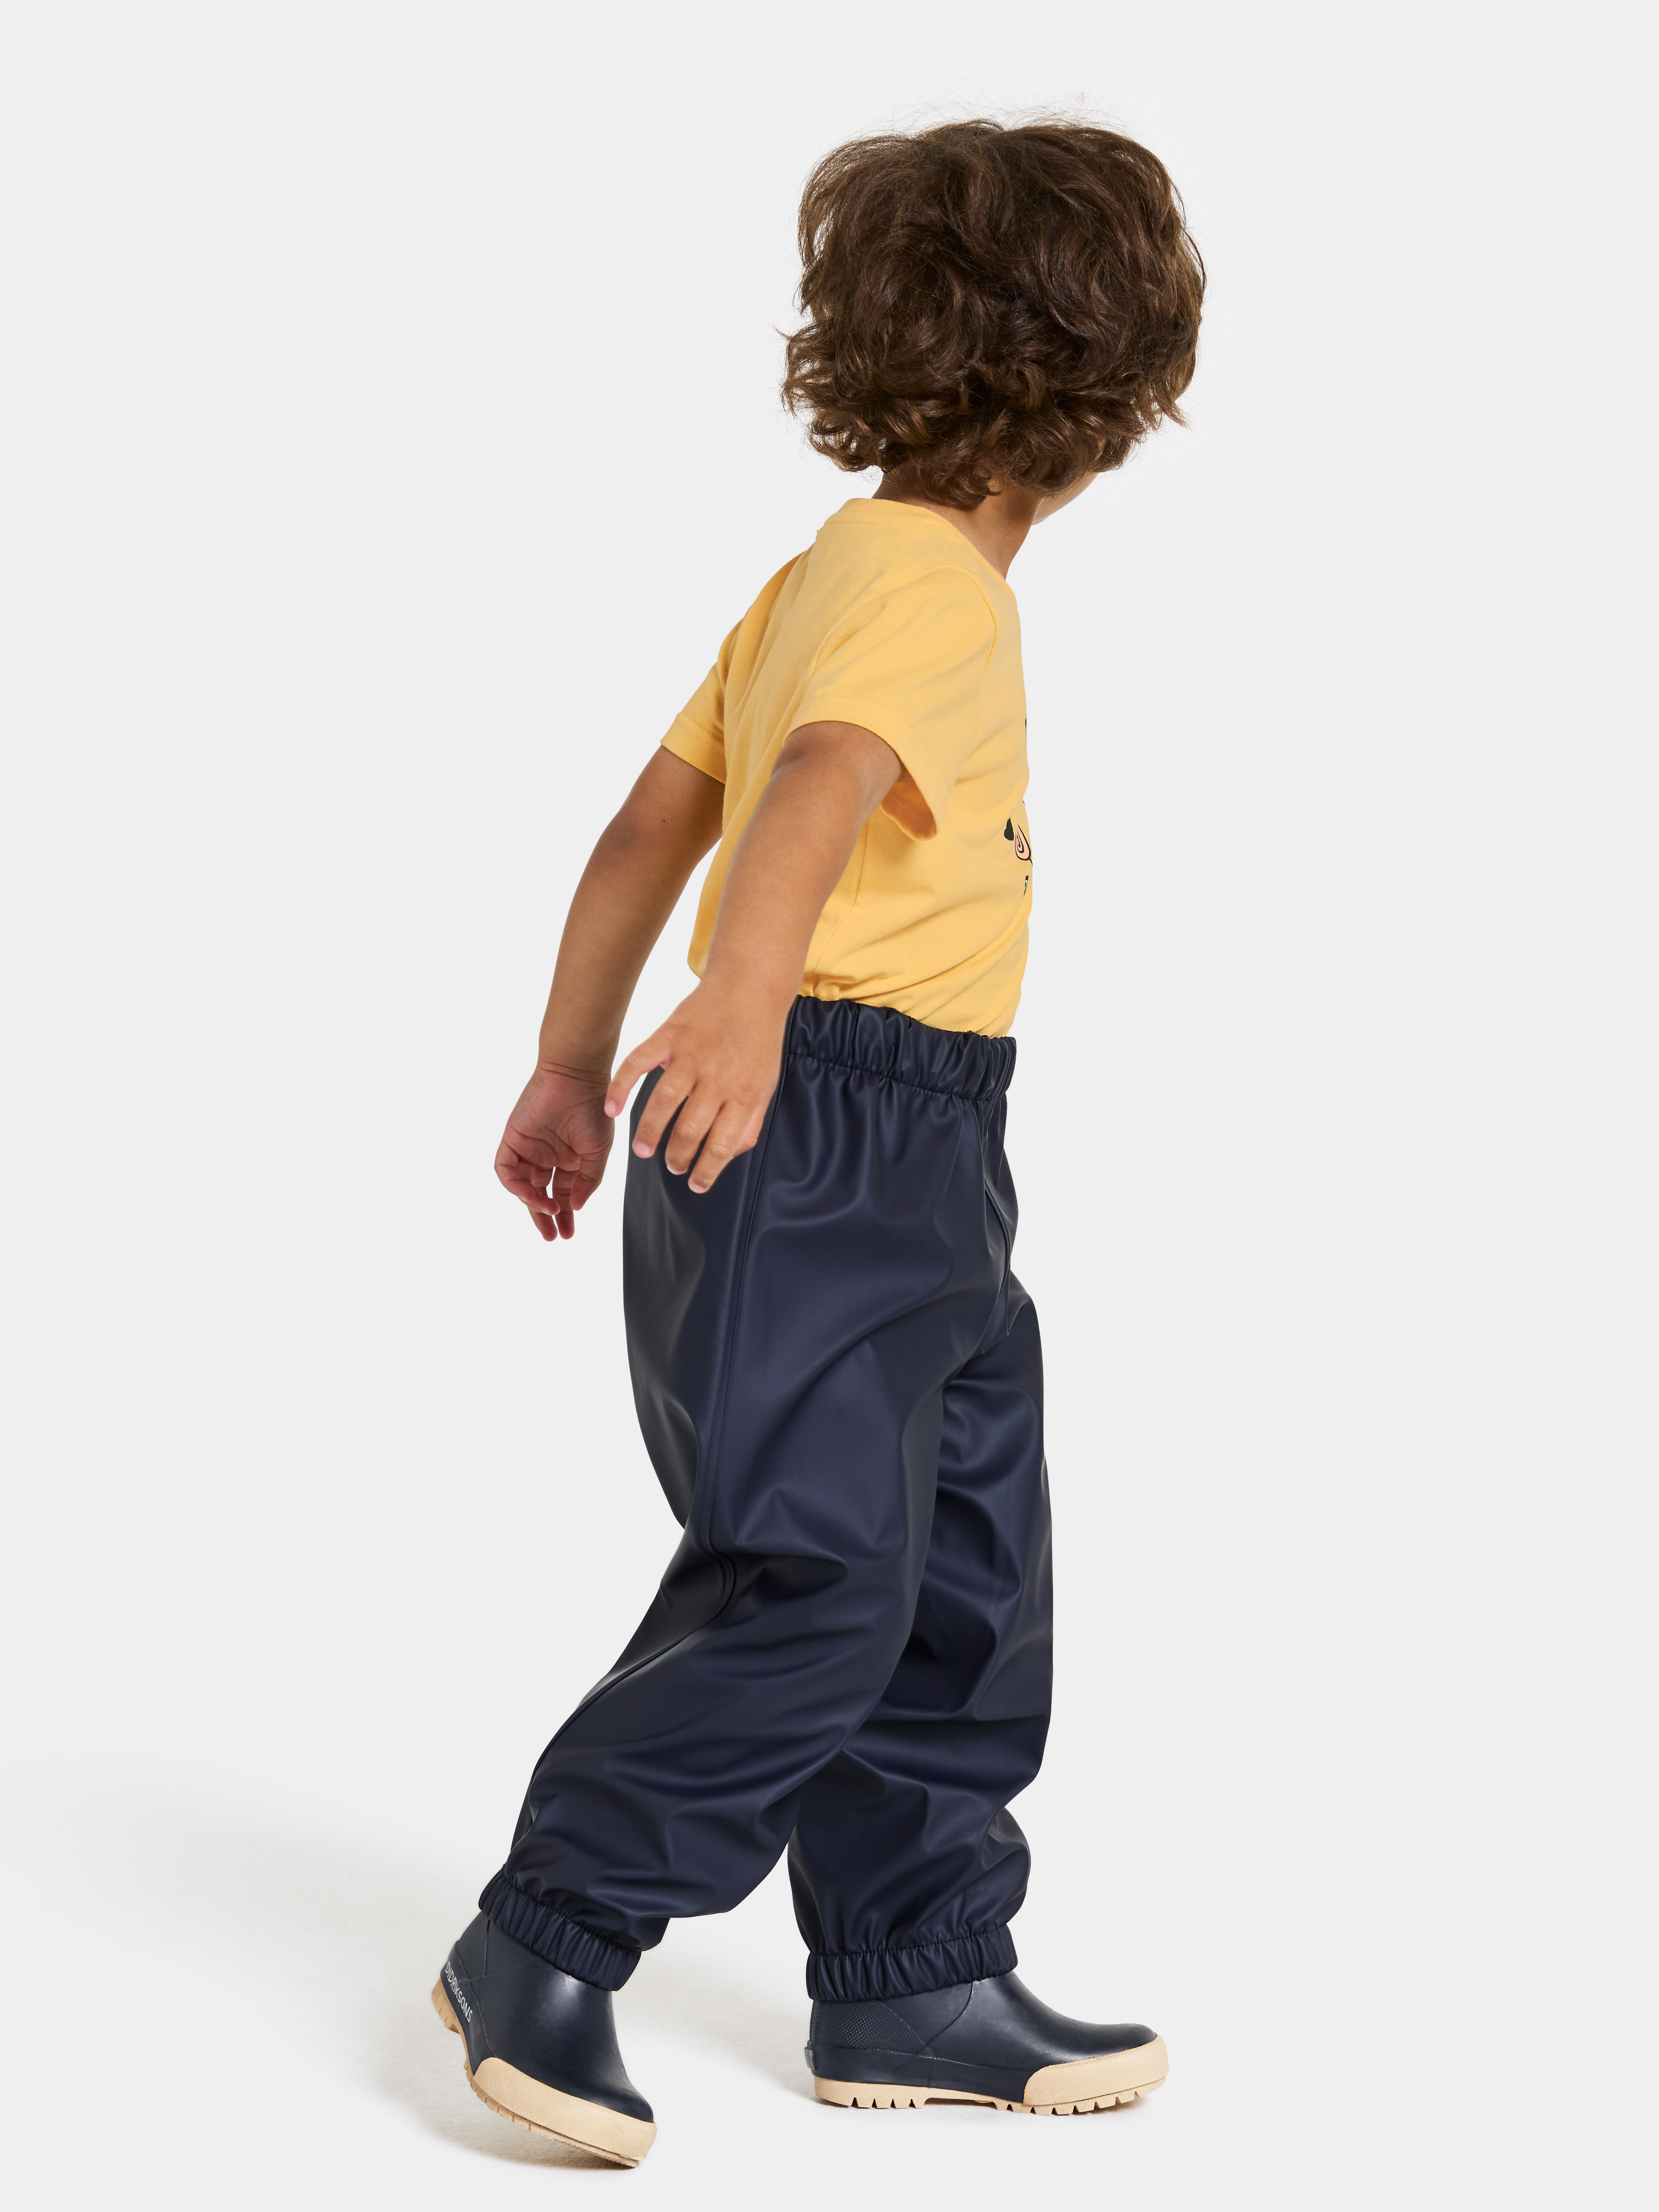  Rubber Pants For Toddlers